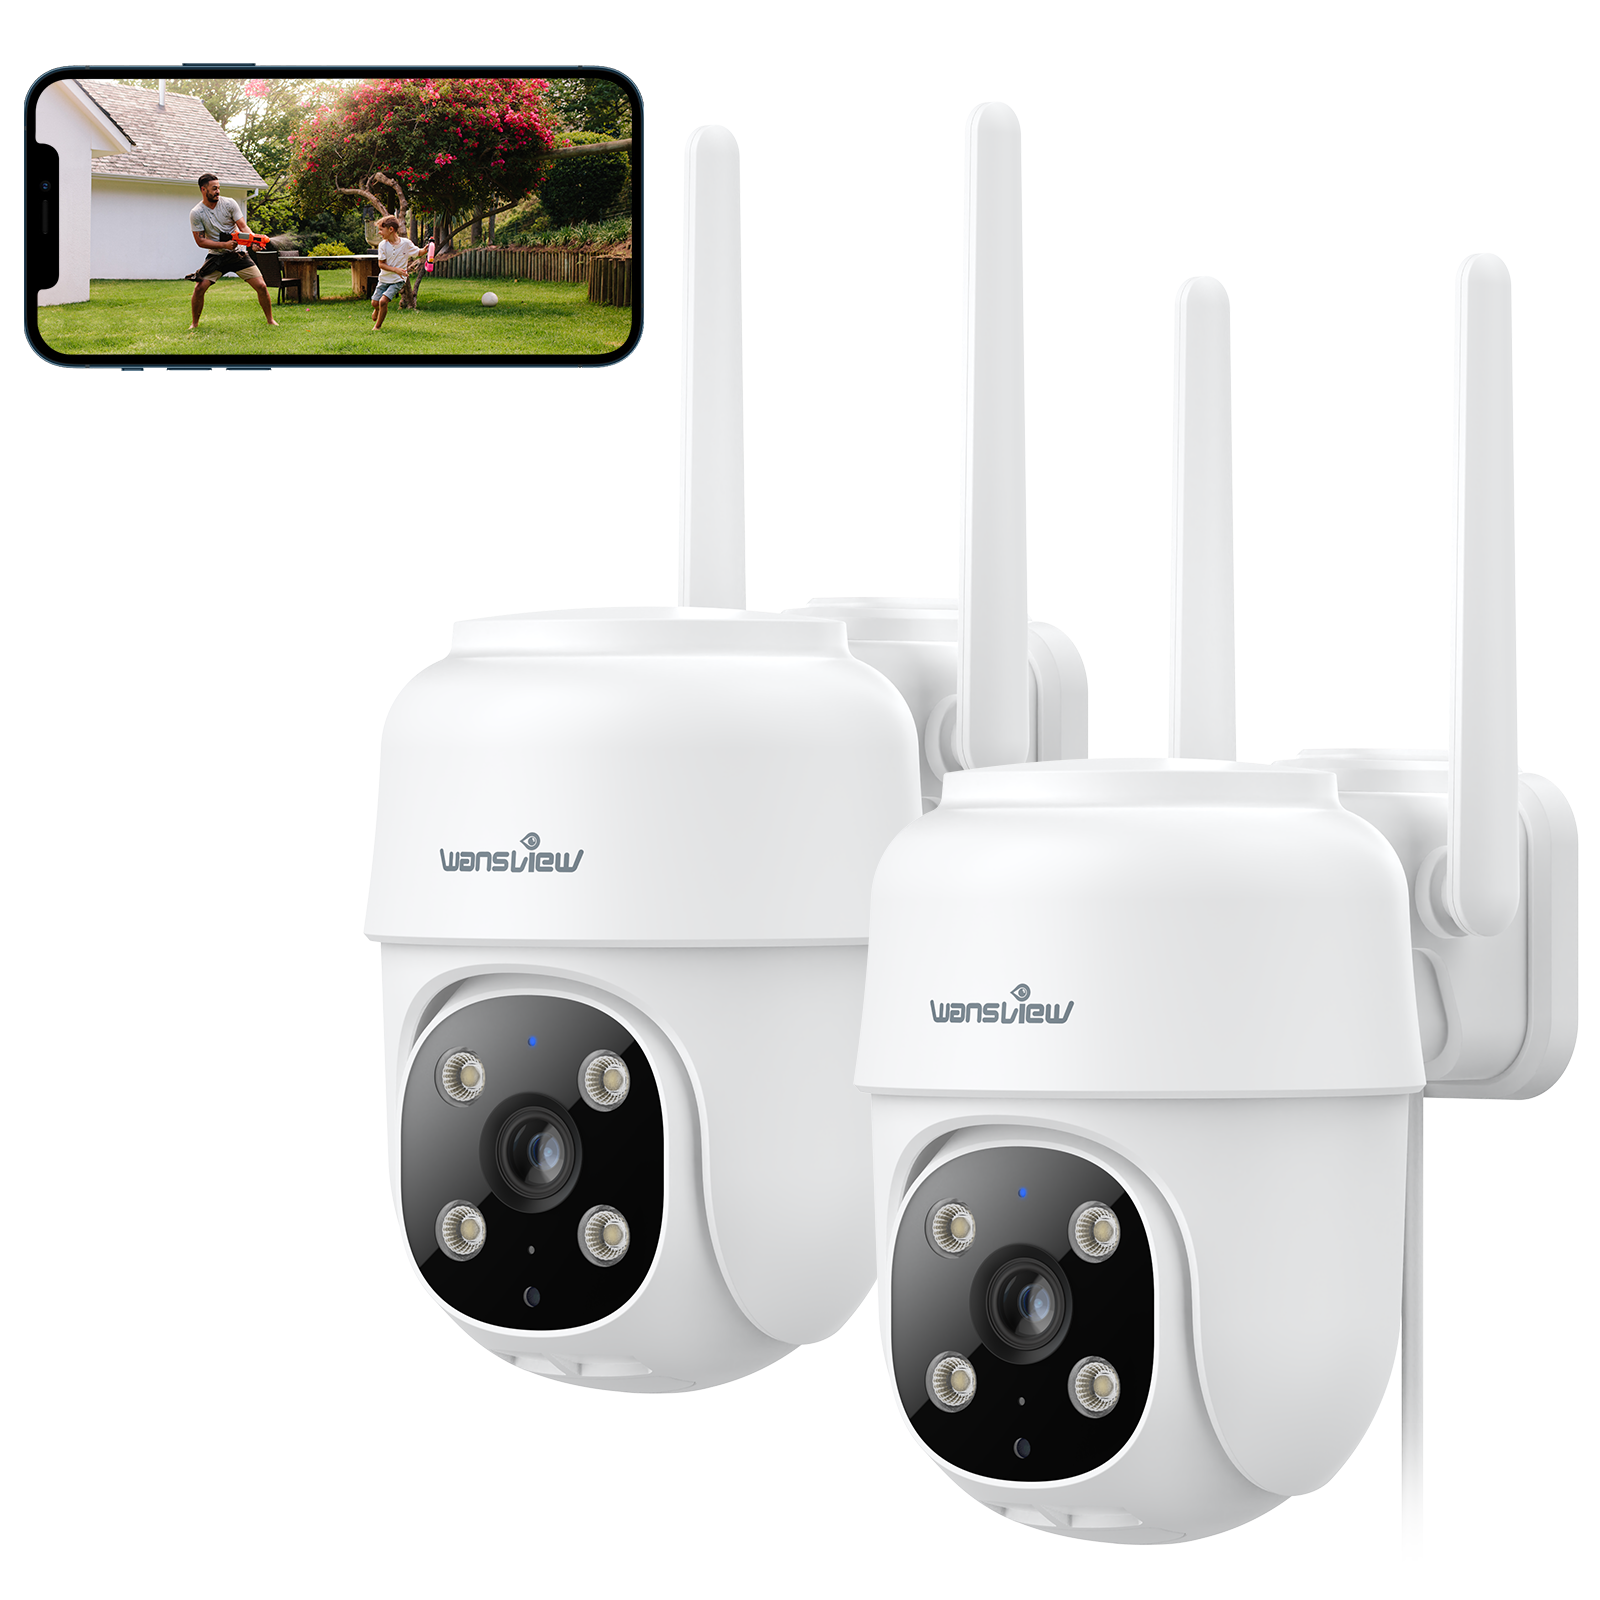 Wansview Outdoor Security Camera, Wansview 1080P Wireless WiFi Home  Surveillance Waterproof Camera with Night Vision, Motion Detection, Remote  Access, Works with Alexa -W4-2PACK